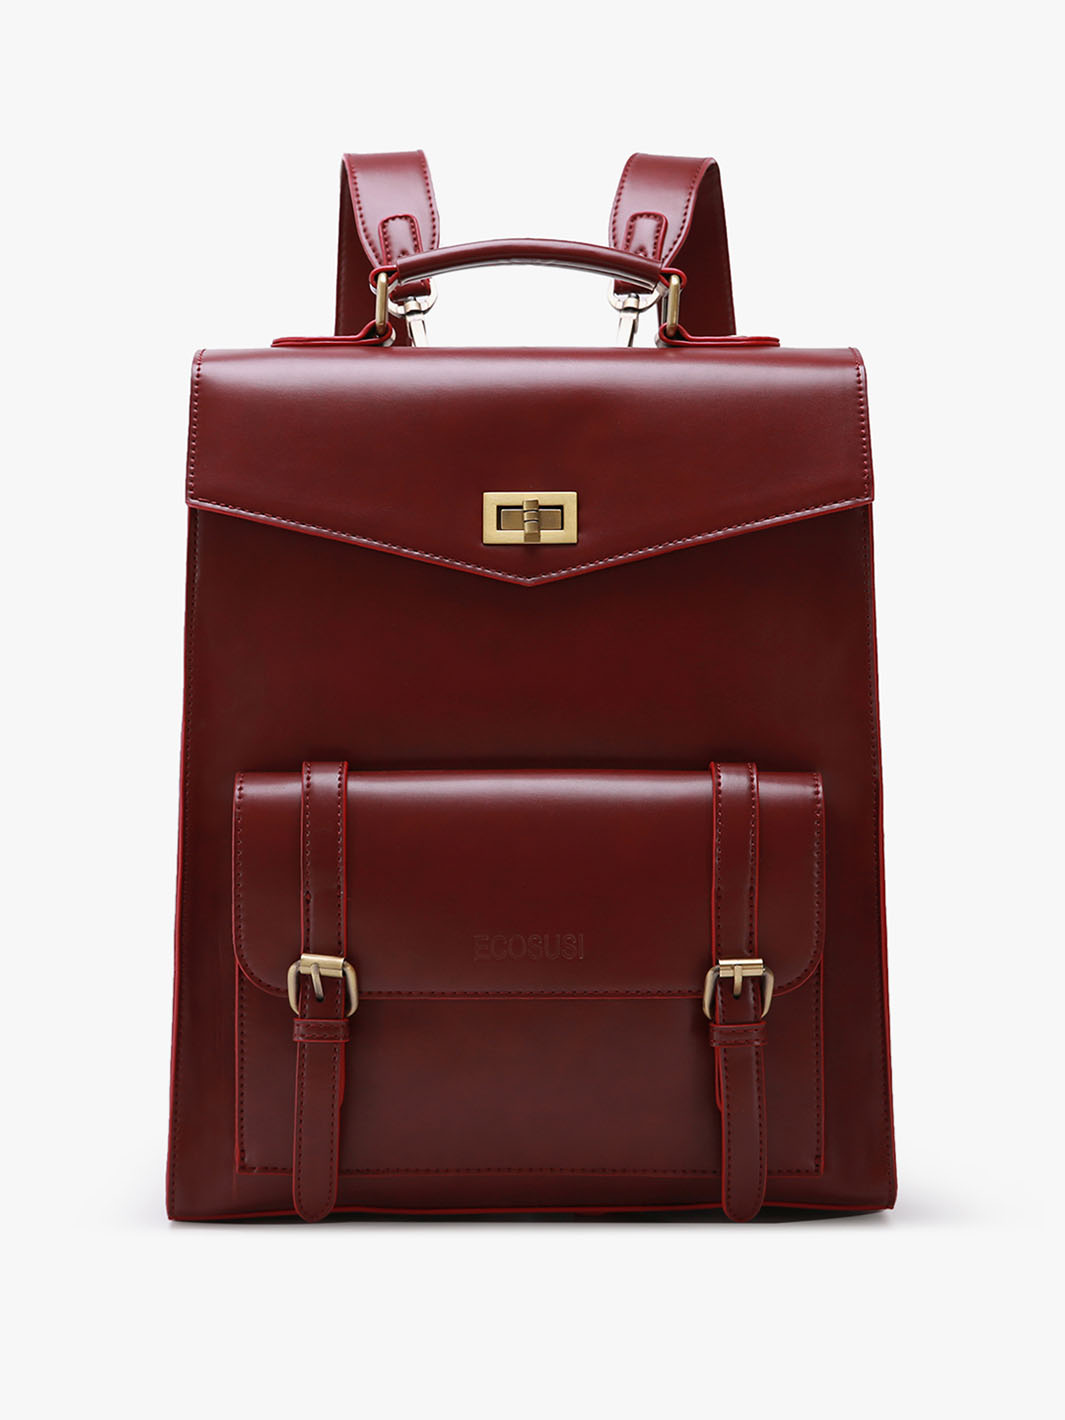  Funky, Chic & Cool Laptop Bag News: Bags for Women